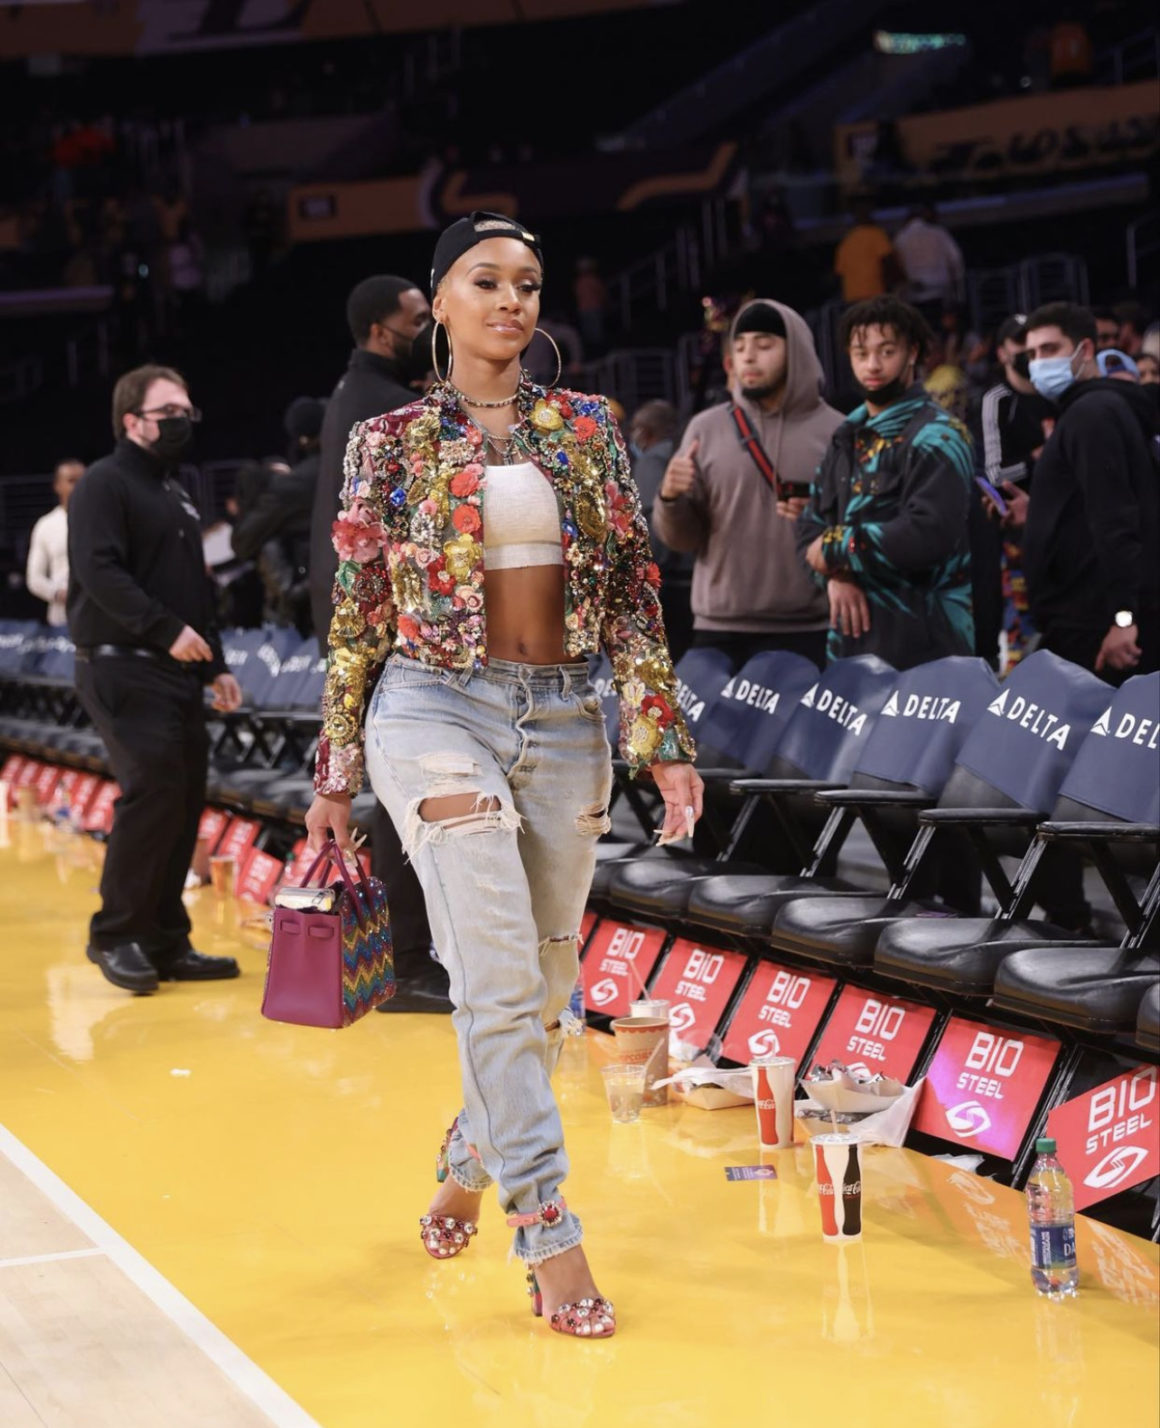 Saweetie Attends Lakers vs. Timberwolves Game in LA Wearing Dolce and Gabbana Embellished Jacket and Pink Heels Paired with White Crop Top Distressed Jeans and Goodie Black Hat